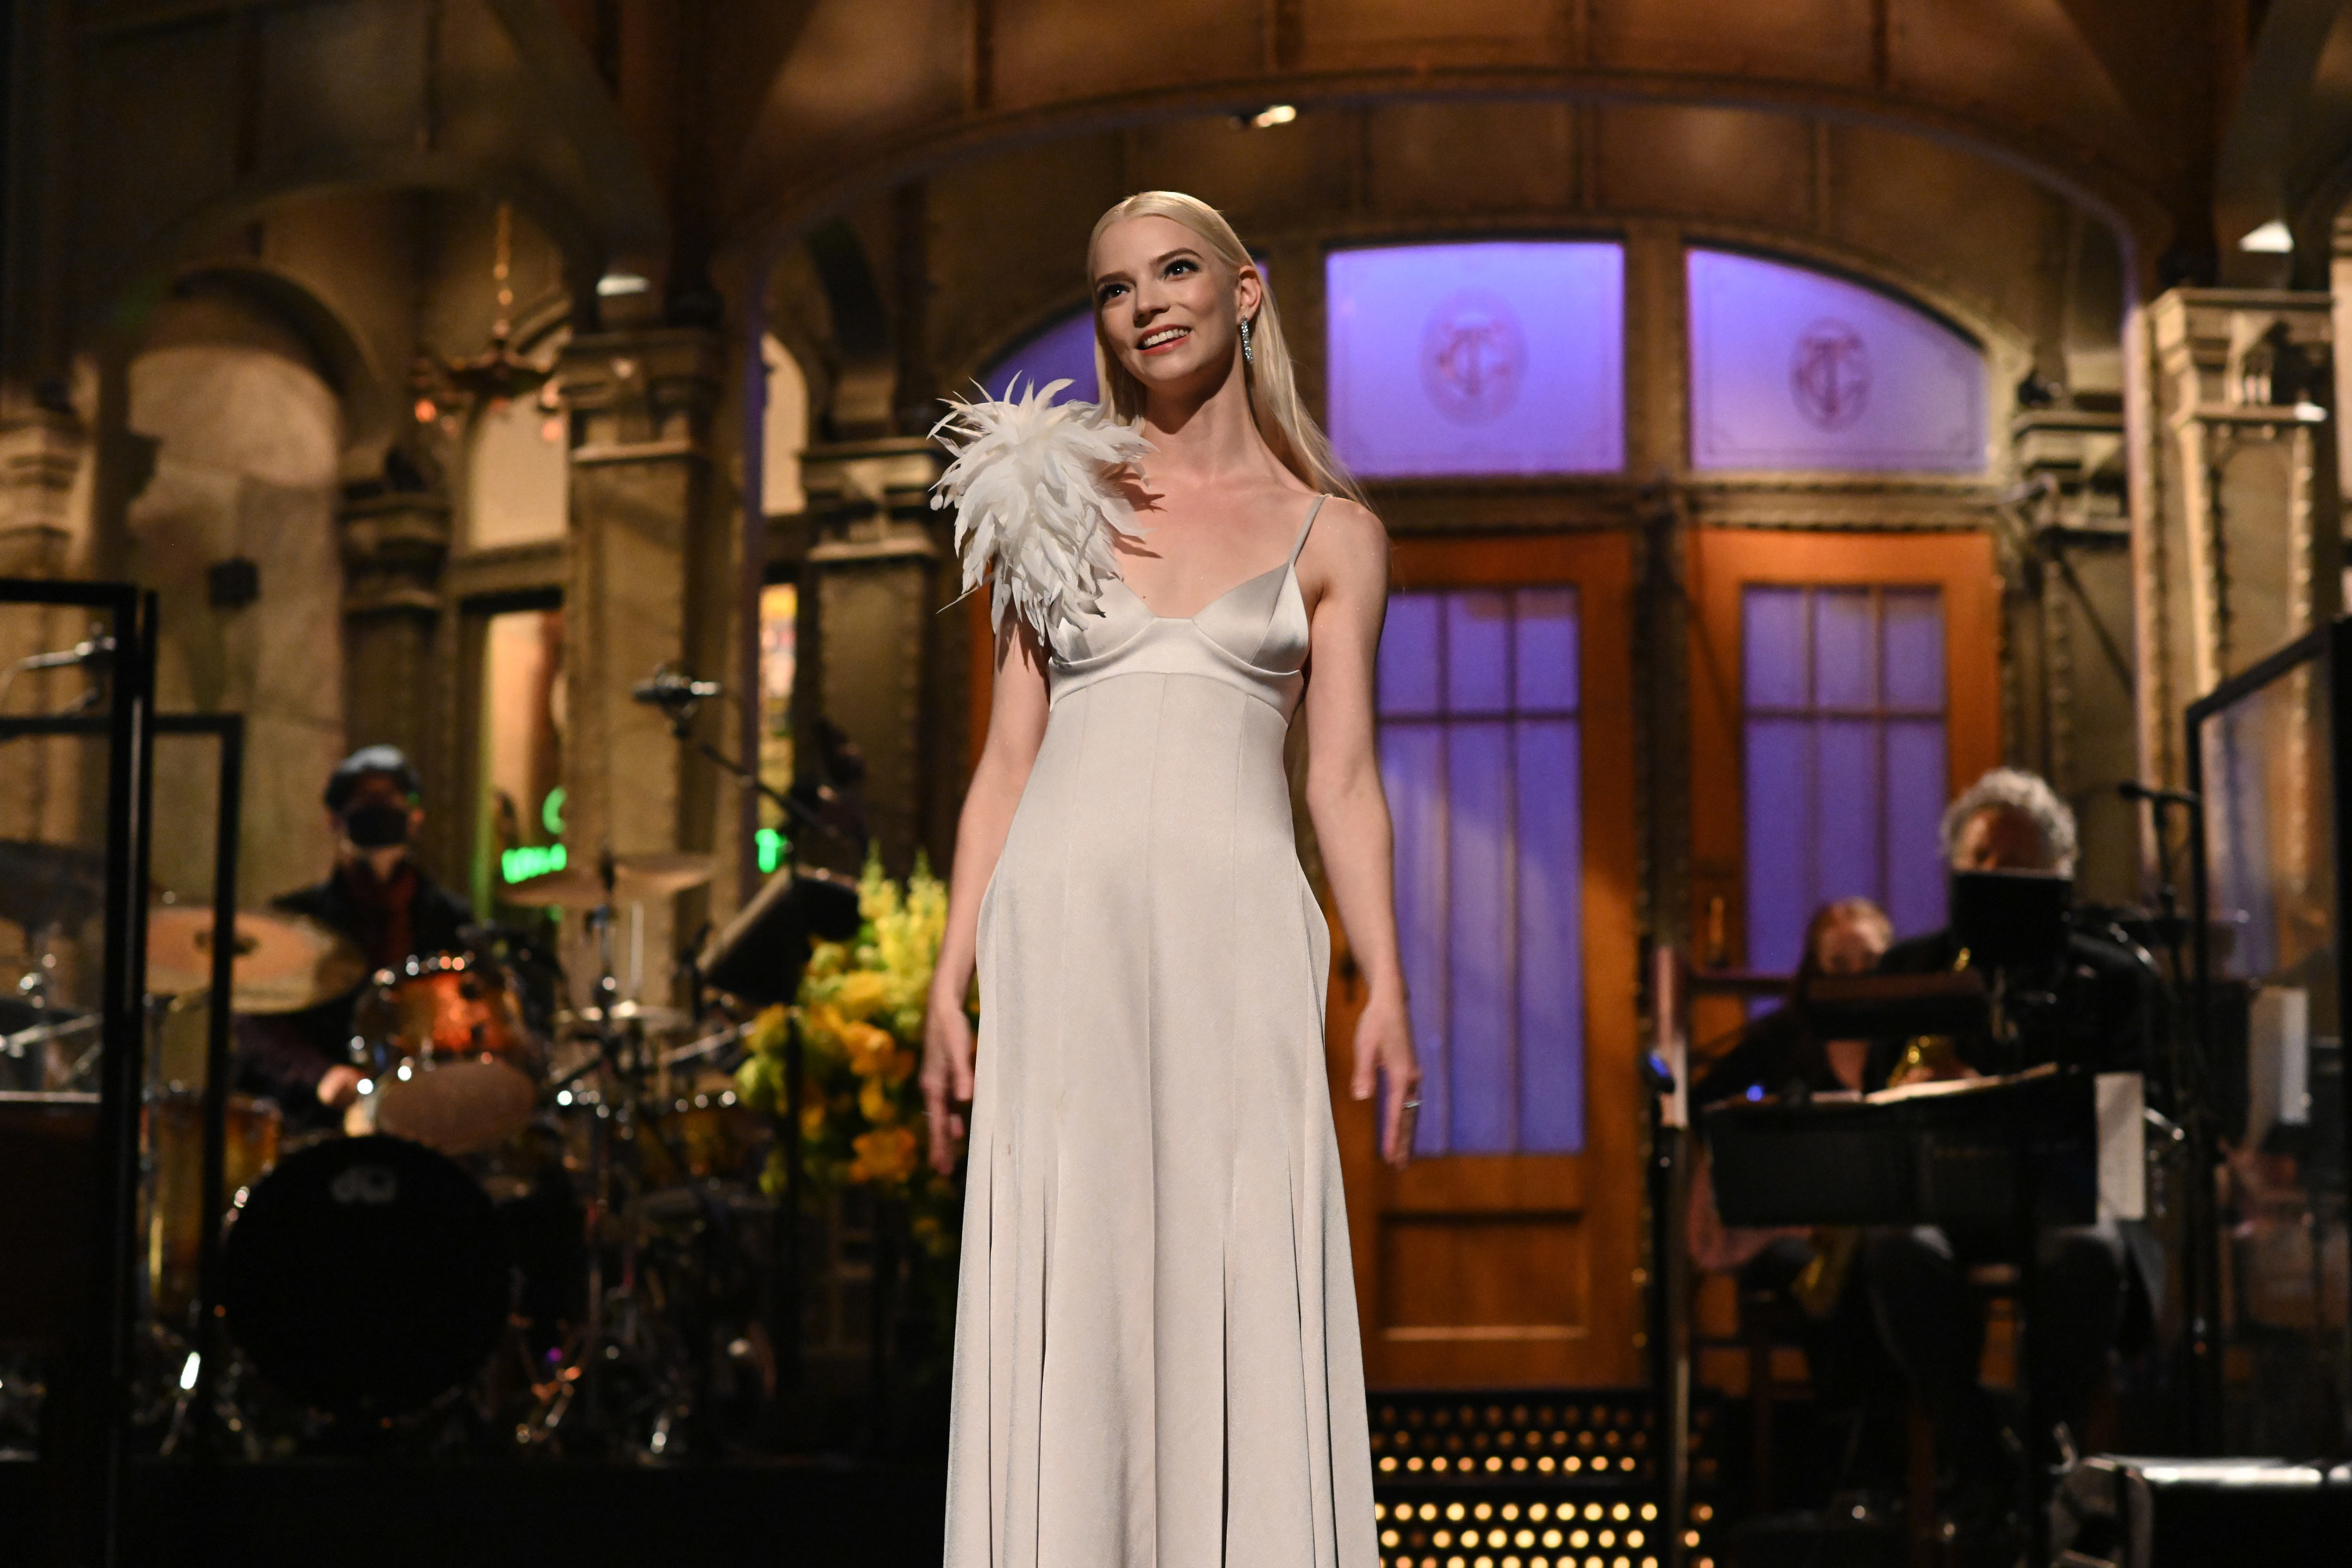 Anya delivering her SNL monologue while wearing a satin dress with feathers on one shoulder